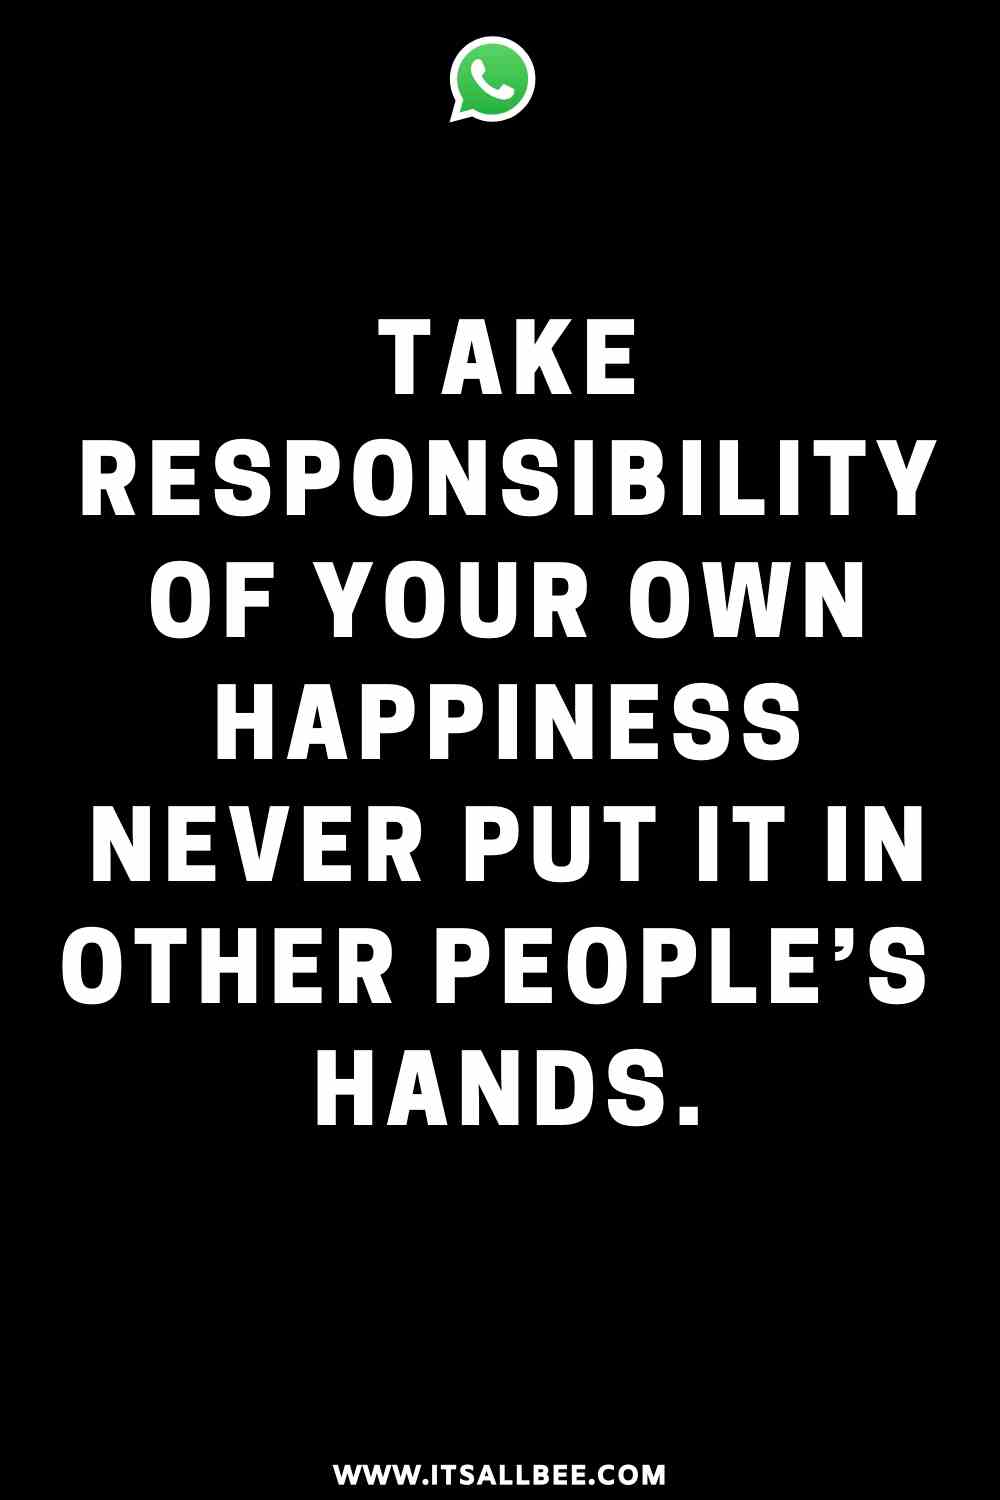 Whatsapp status - take reponsibility of your own happiness, never put it in other people's hands